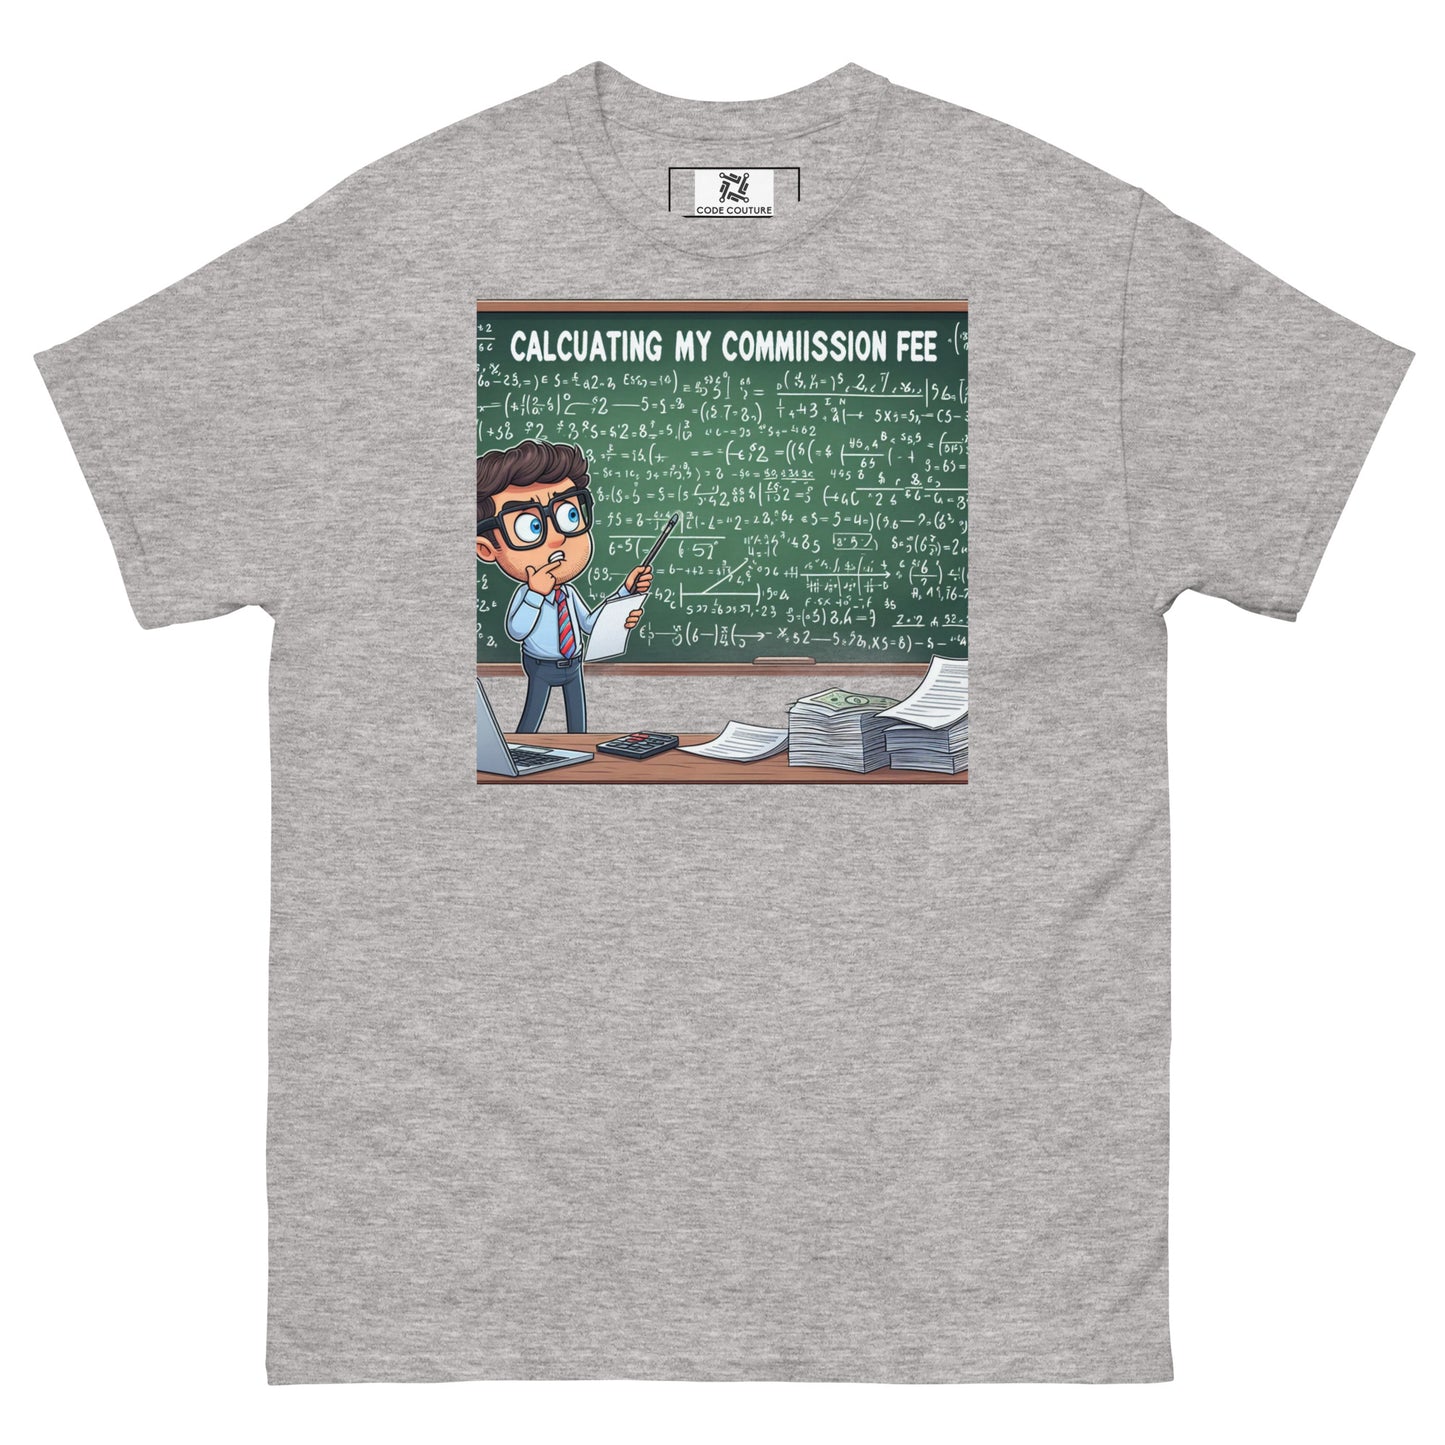 Calculating Commission Fee tee